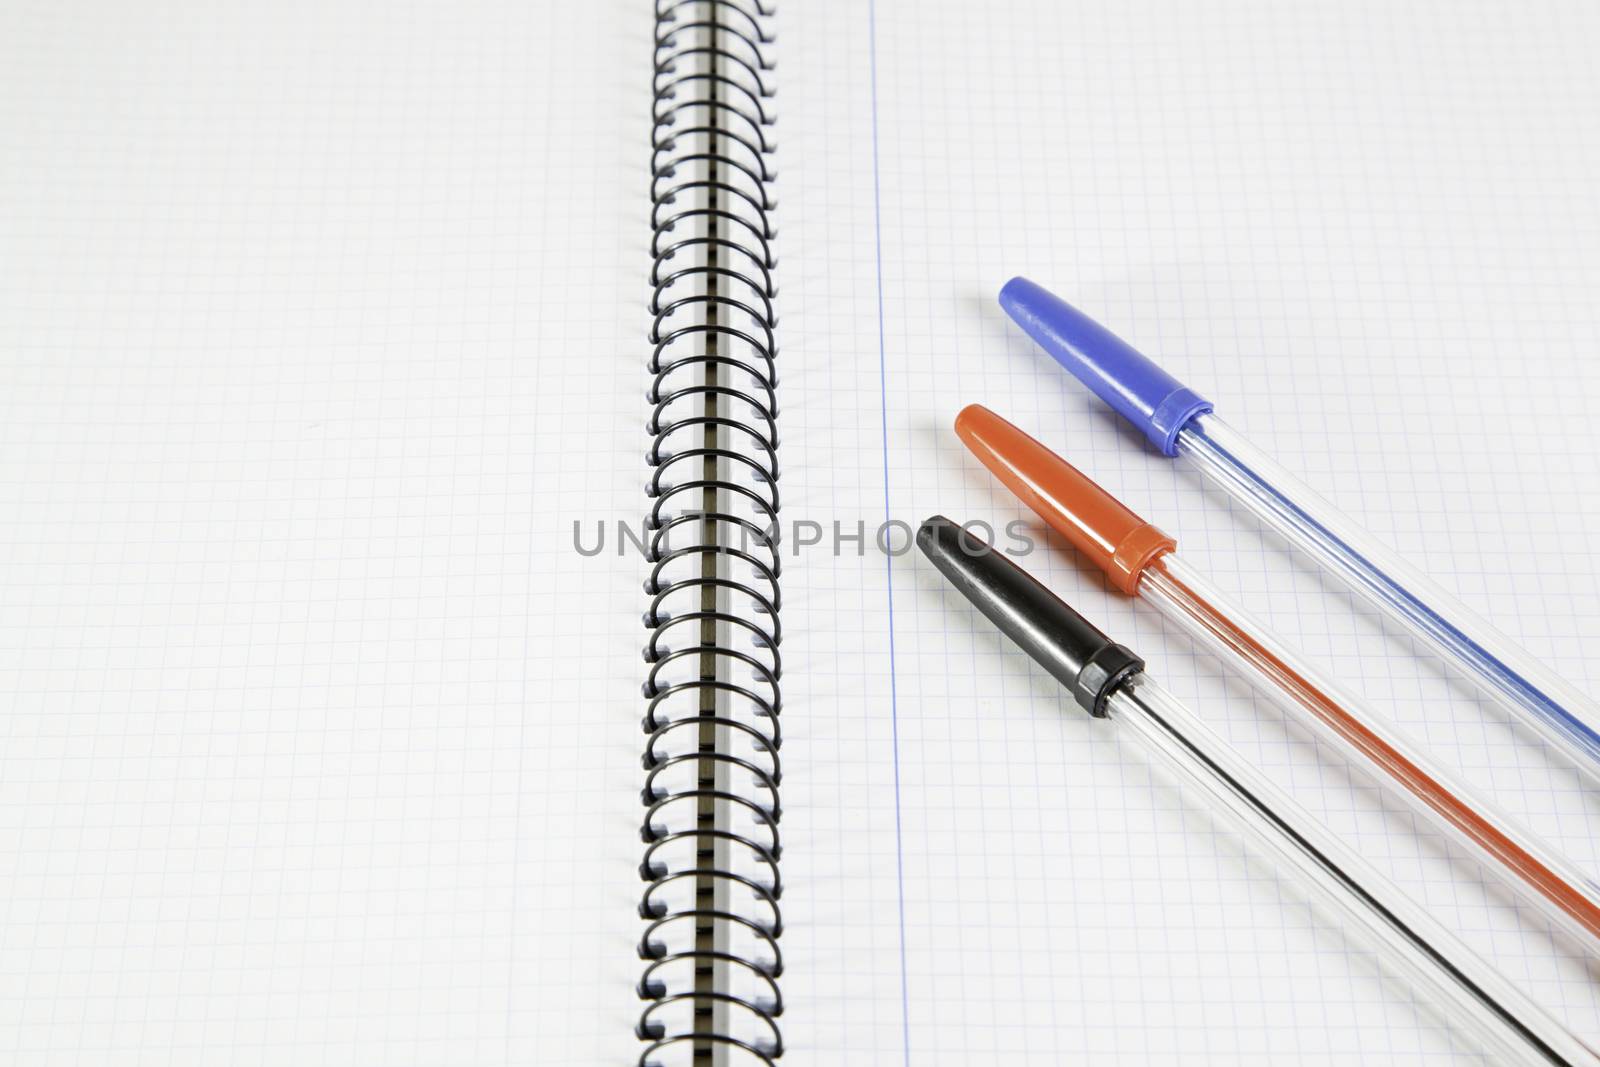 Three basic color pens on a notebook by esebene